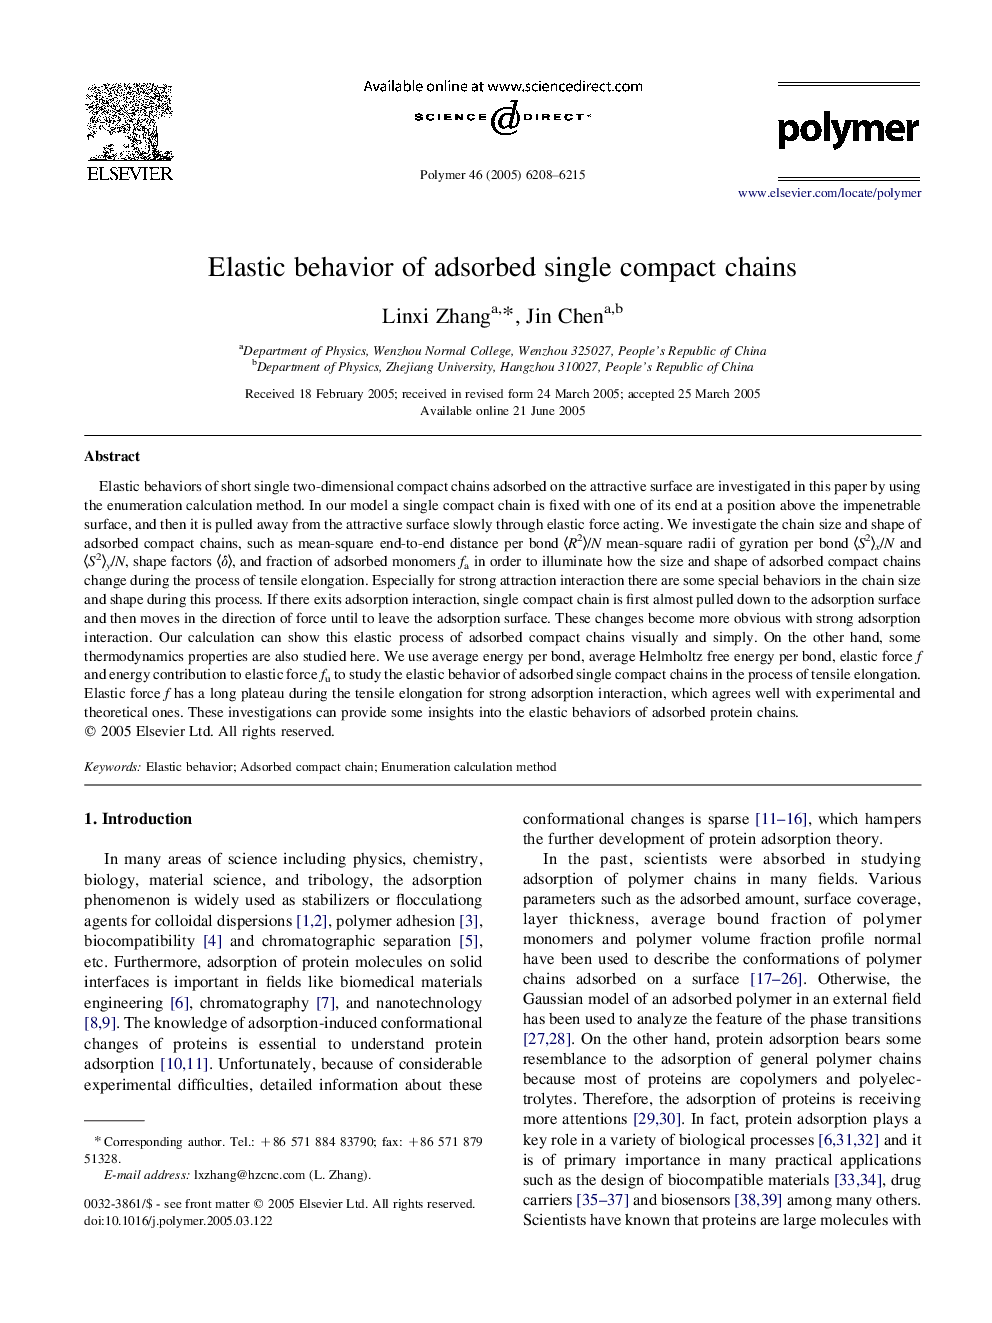 Elastic behavior of adsorbed single compact chains